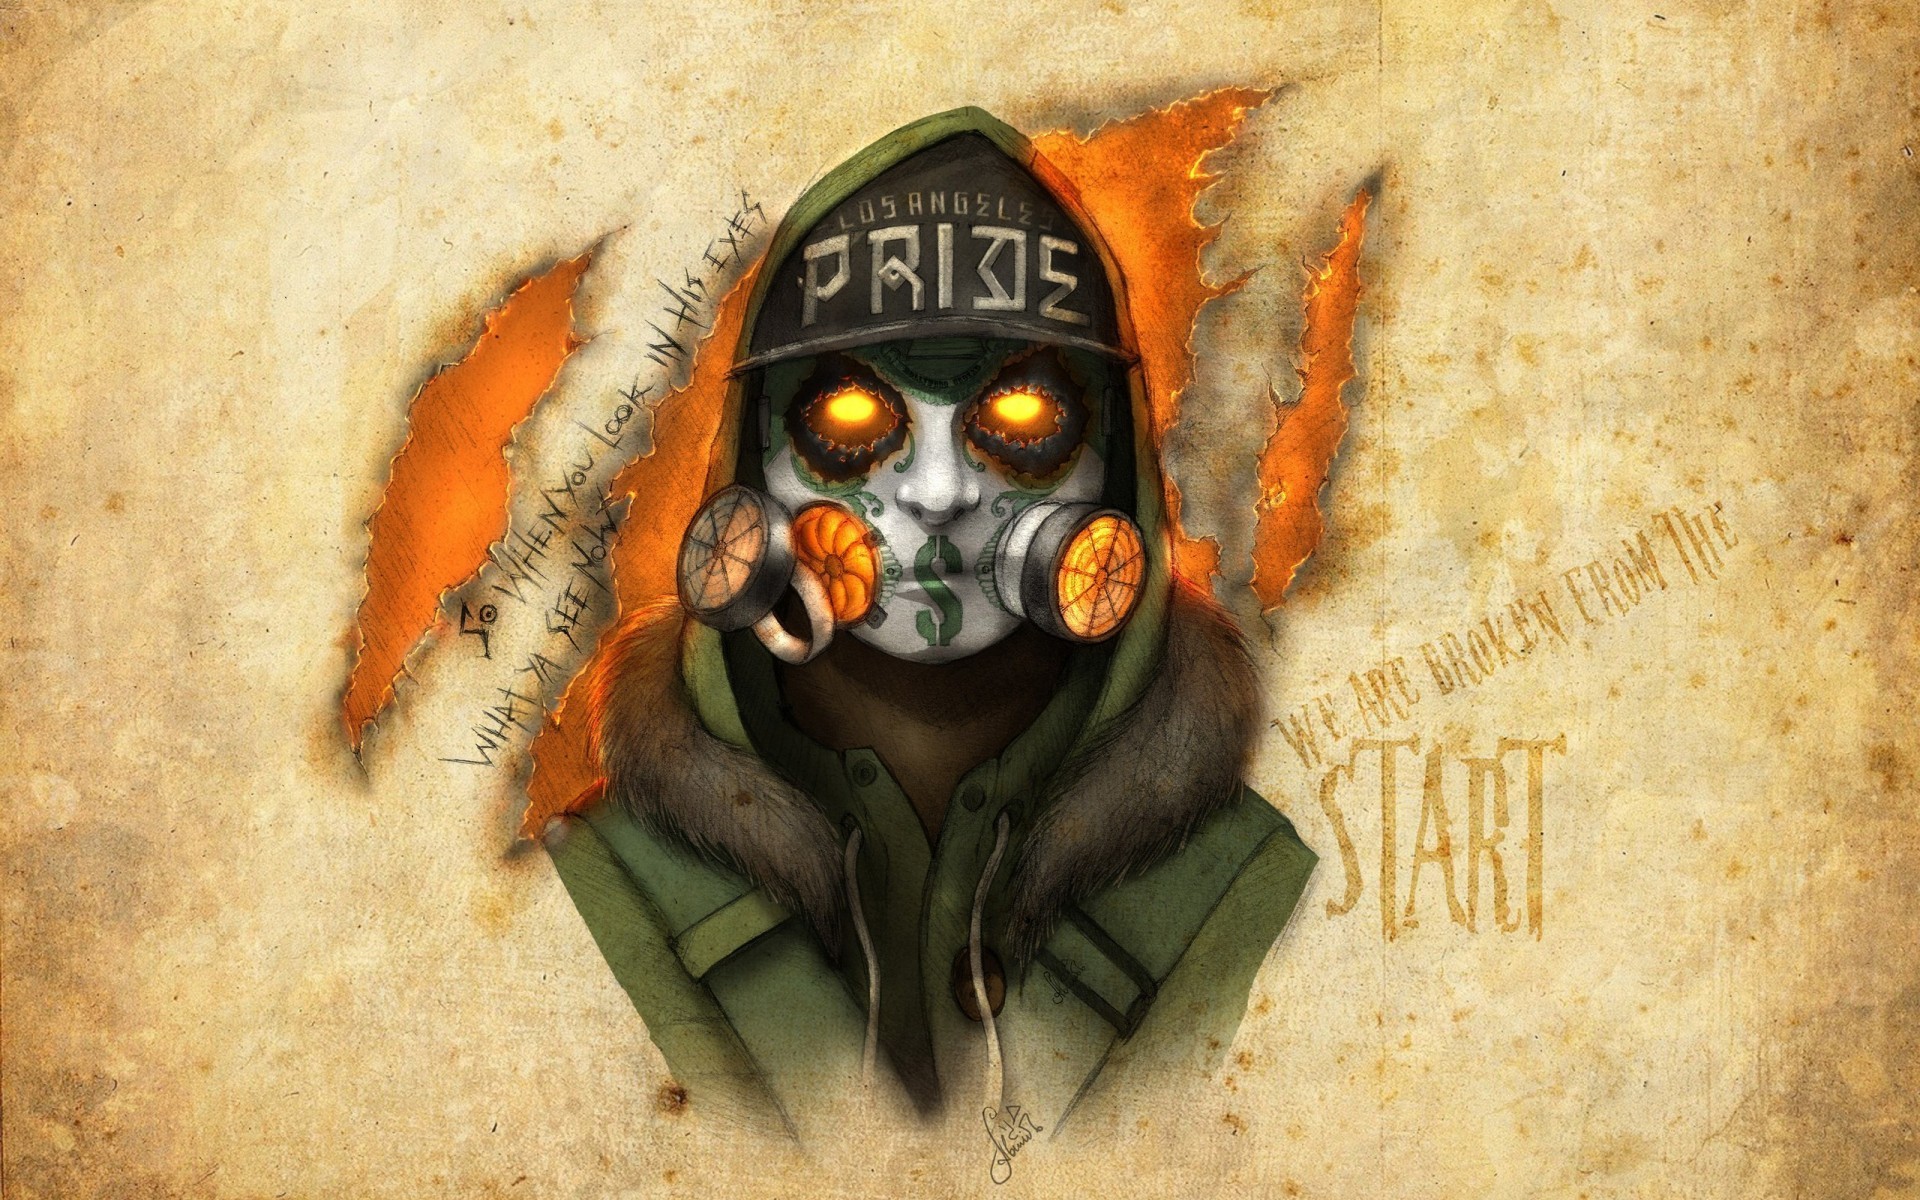 1920x1200 Hollywood Undead Notes from the Underground J-Dog artwork dark gas mask  wallpaper